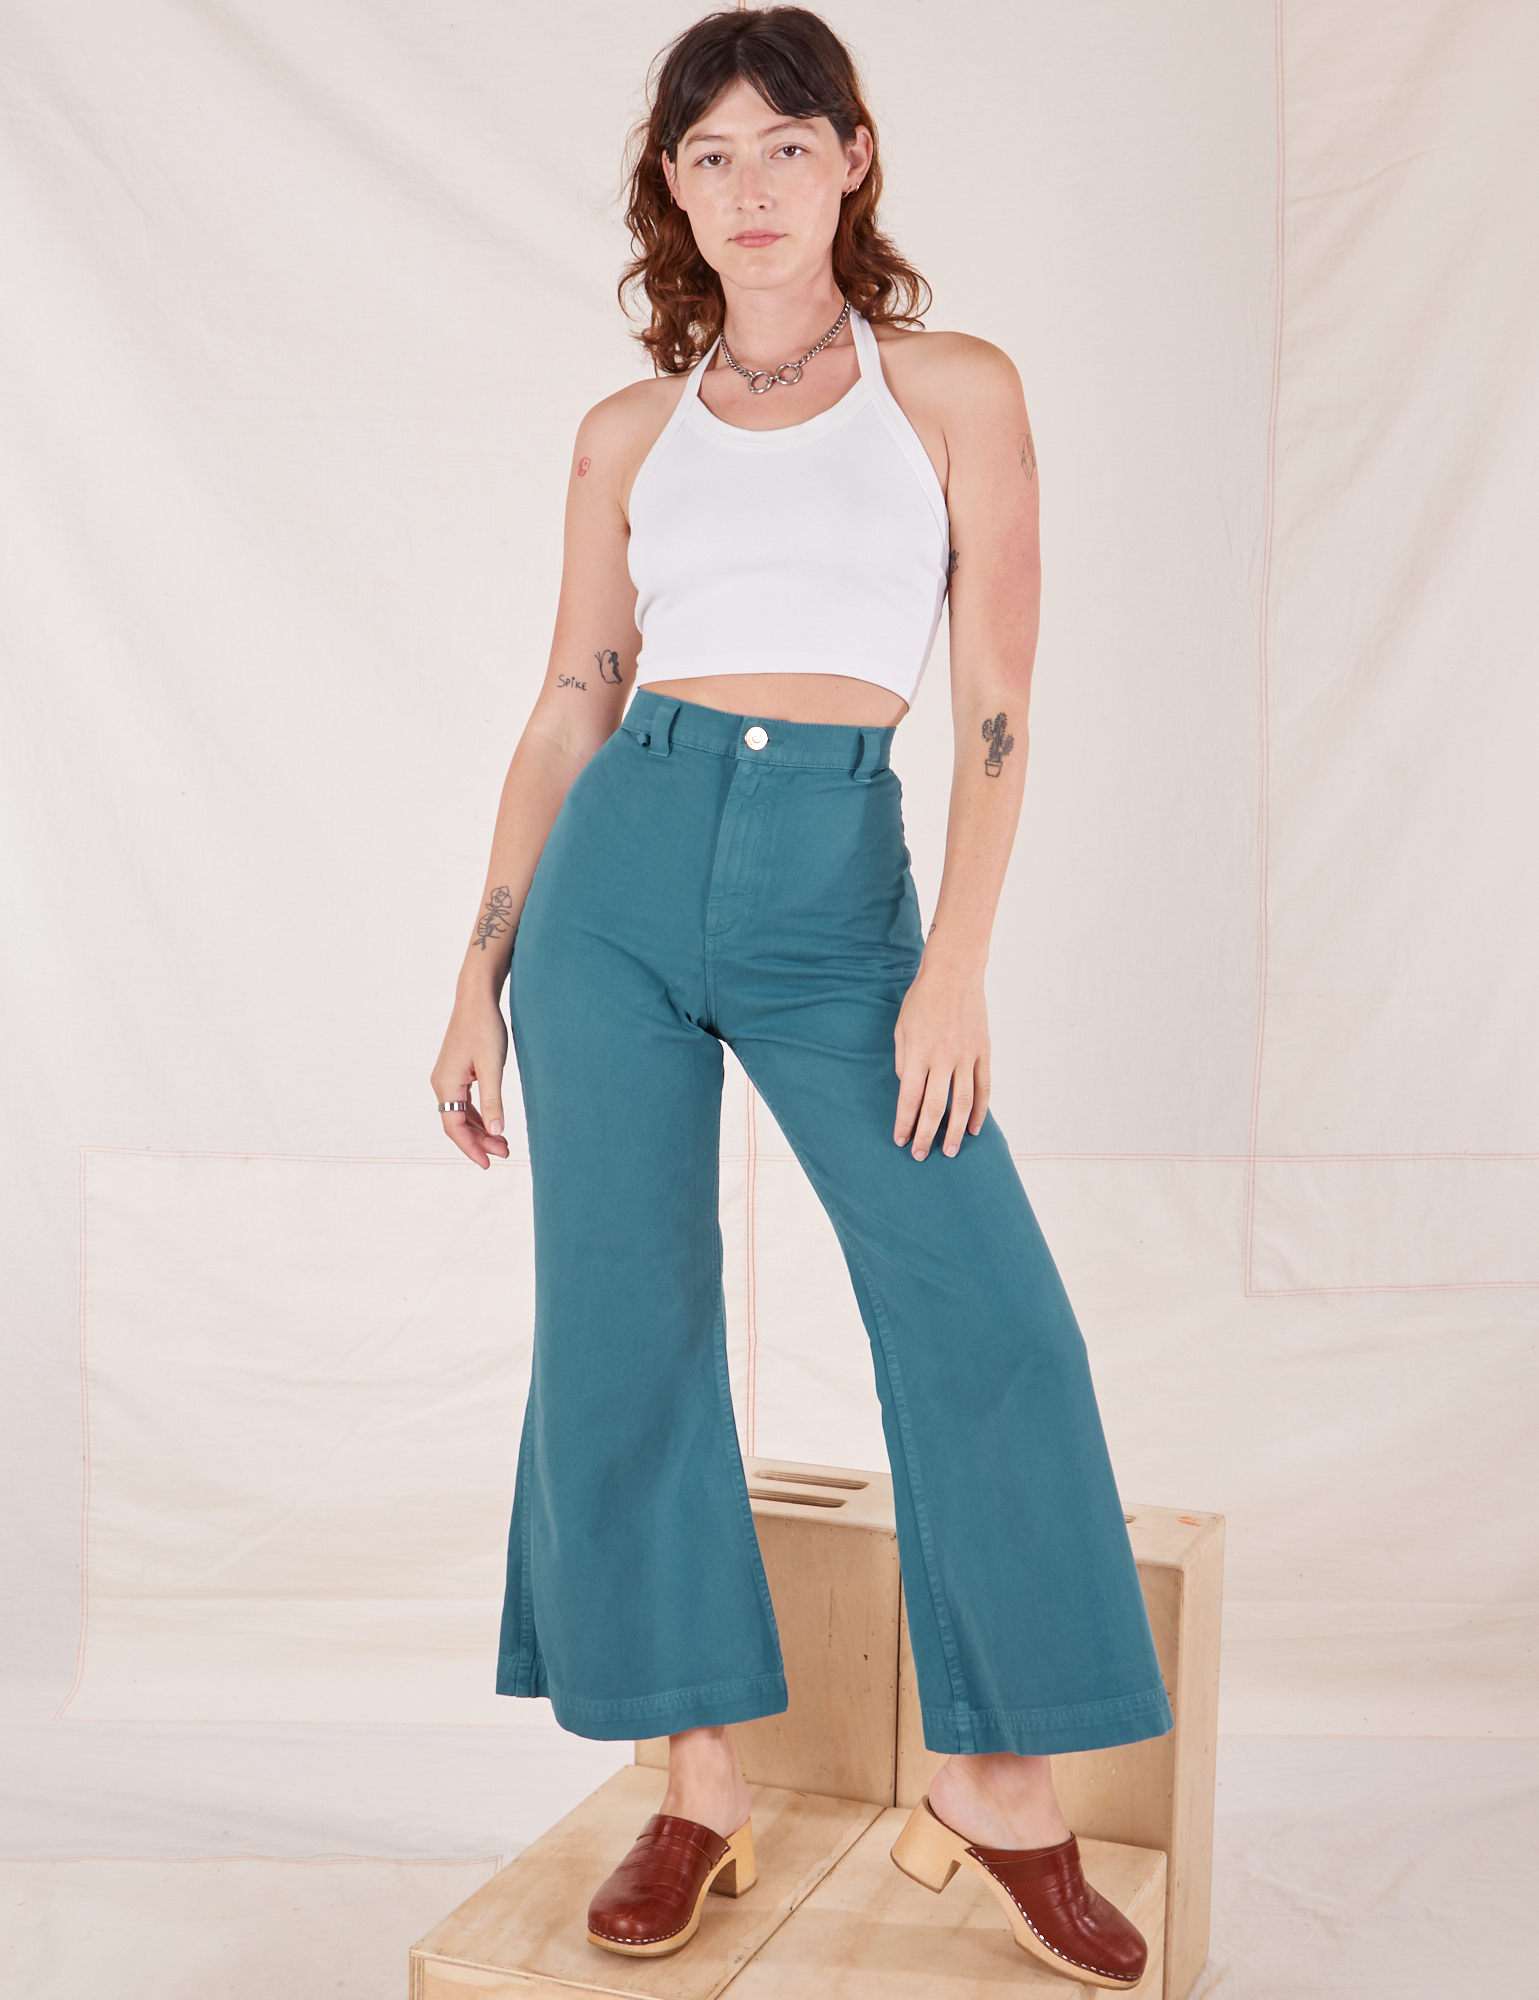 Alex is 5'8" and wearing XXS Bell Bottoms in Marine Blue paired with vintage off-white Halter Top